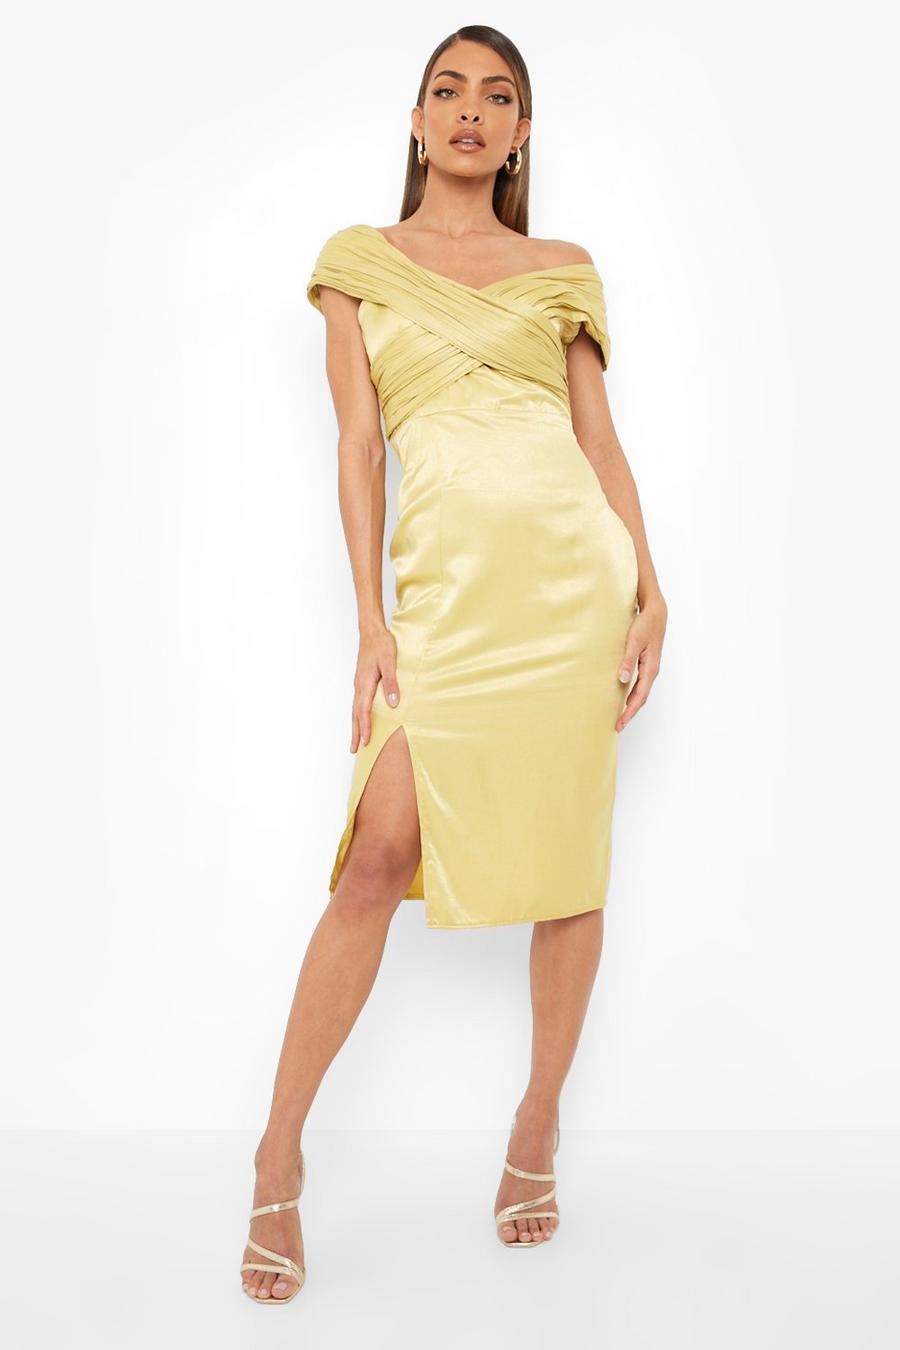 Chartreuse yellow One Shoulder Midi Bridesmaid Dress image number 1